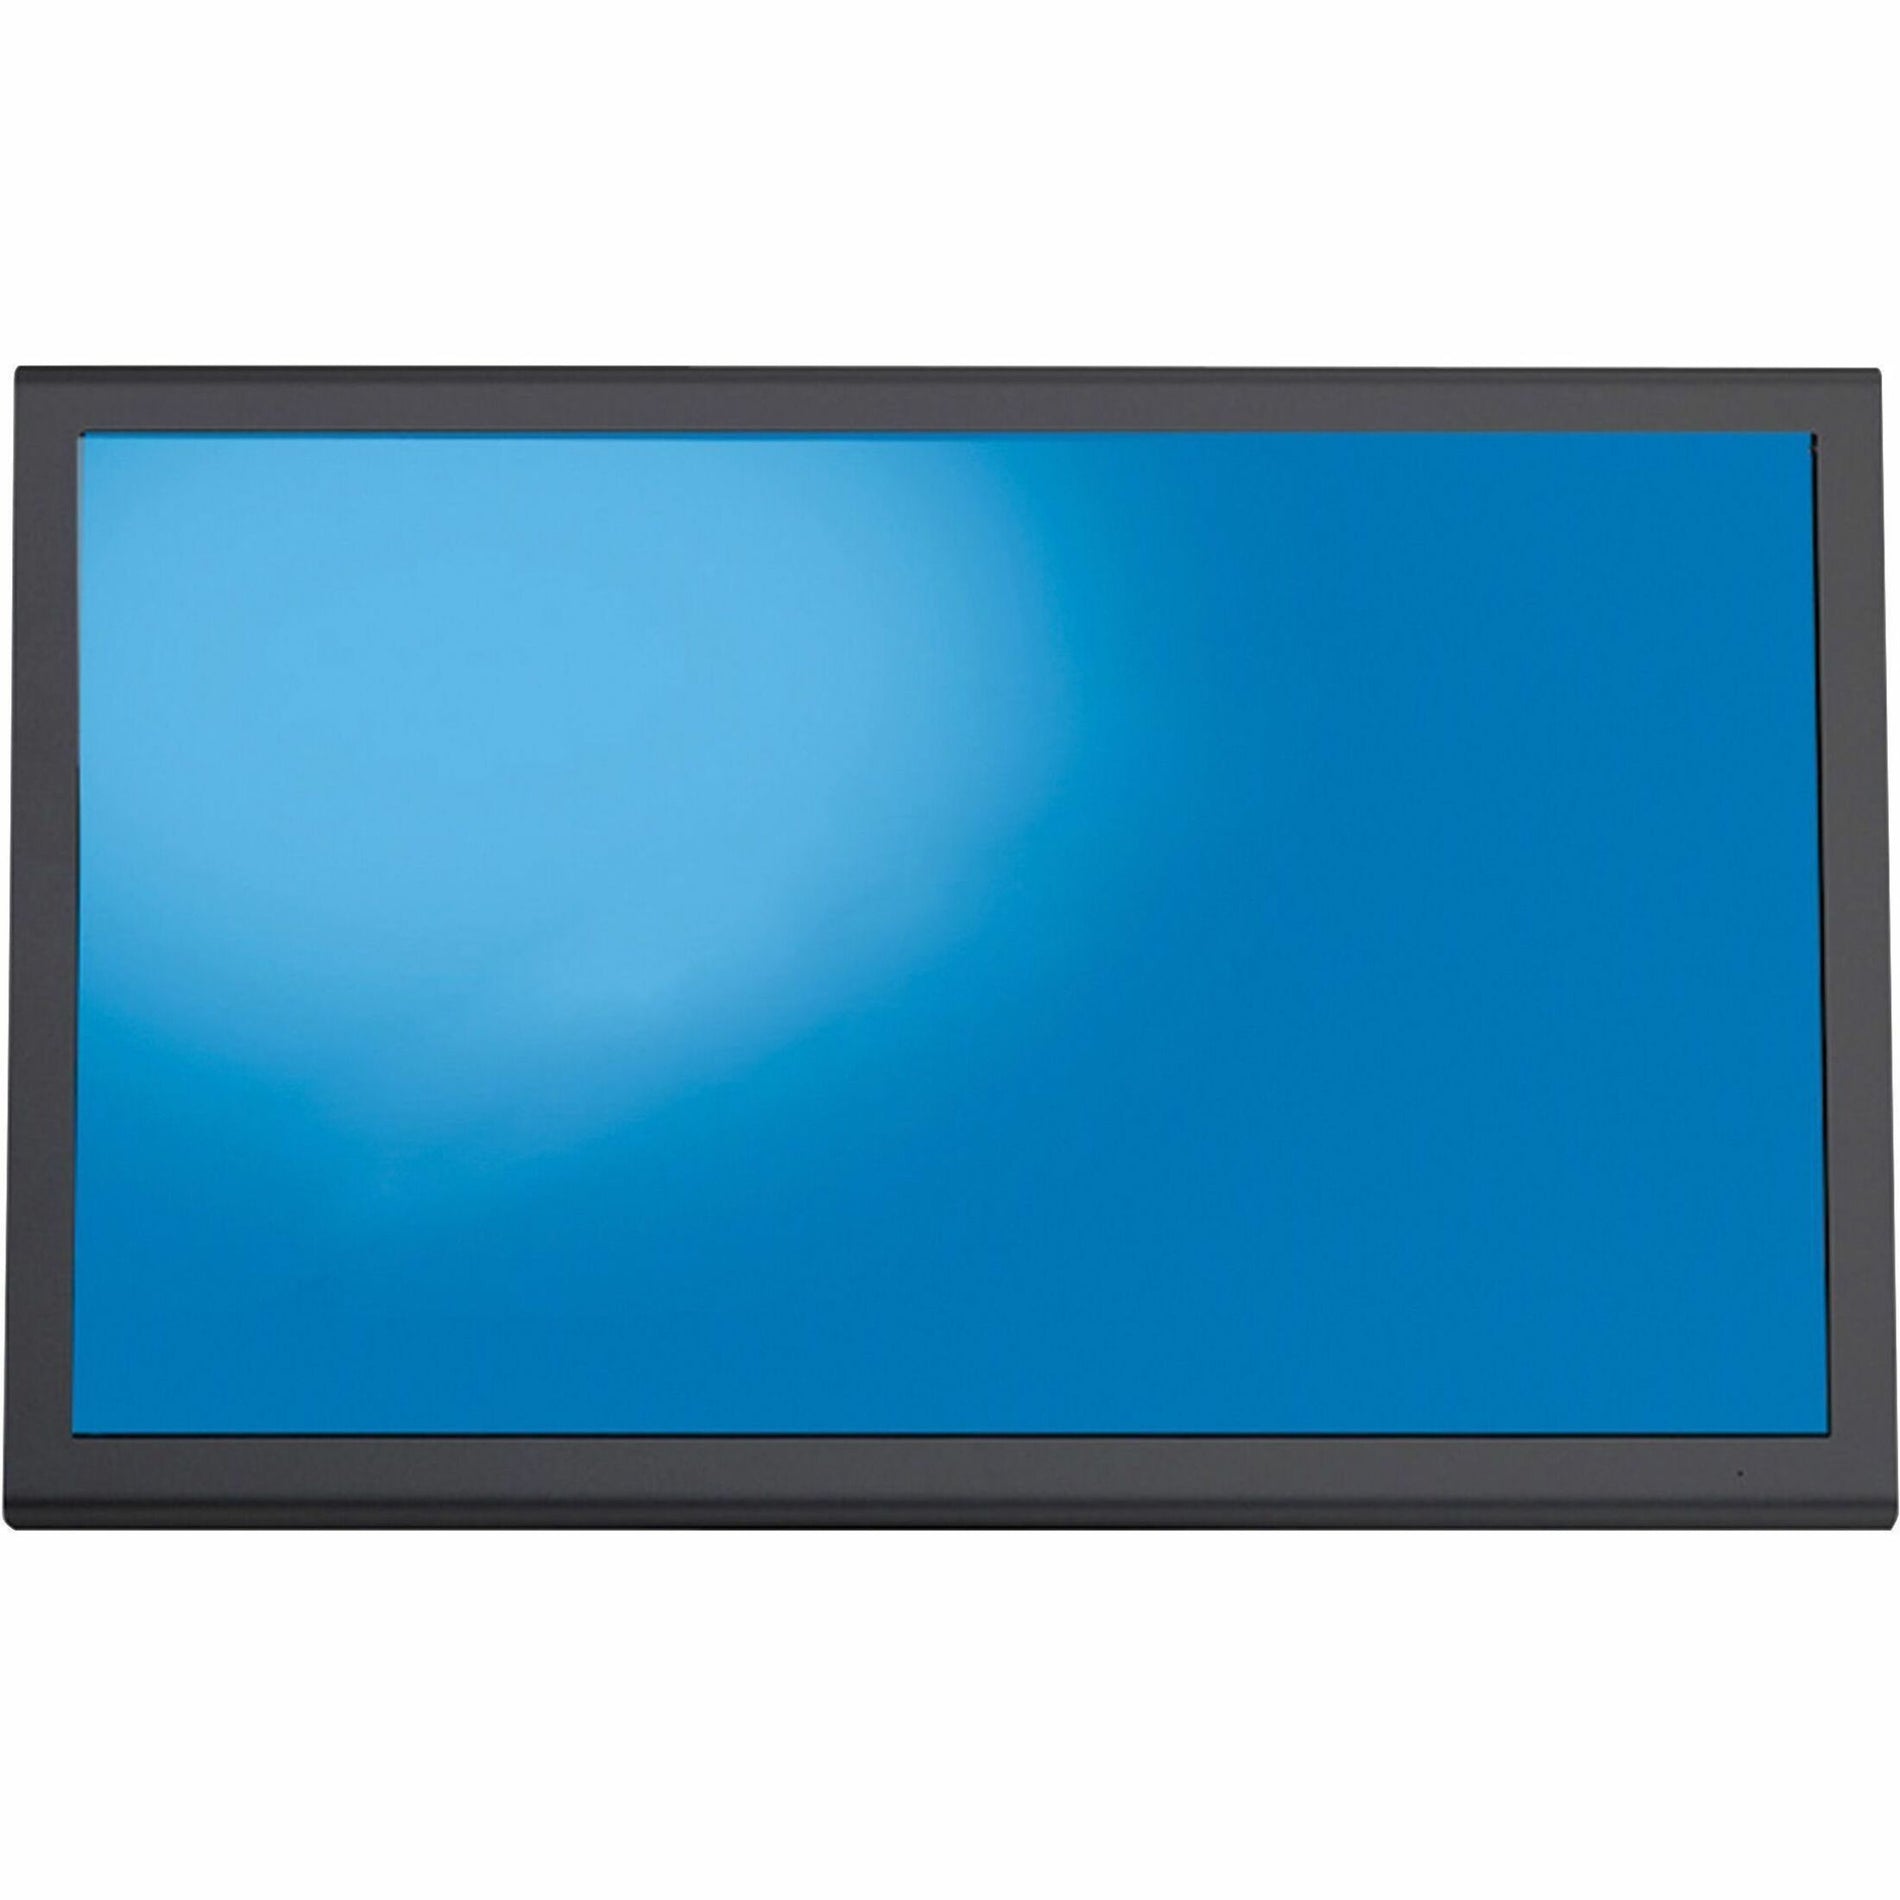 3M PF220W1B Privacy Filter, f/22" Wide-screen, 16:10, Easy to Apply, Easy Clean, Limited Viewing Angle, Matte Black